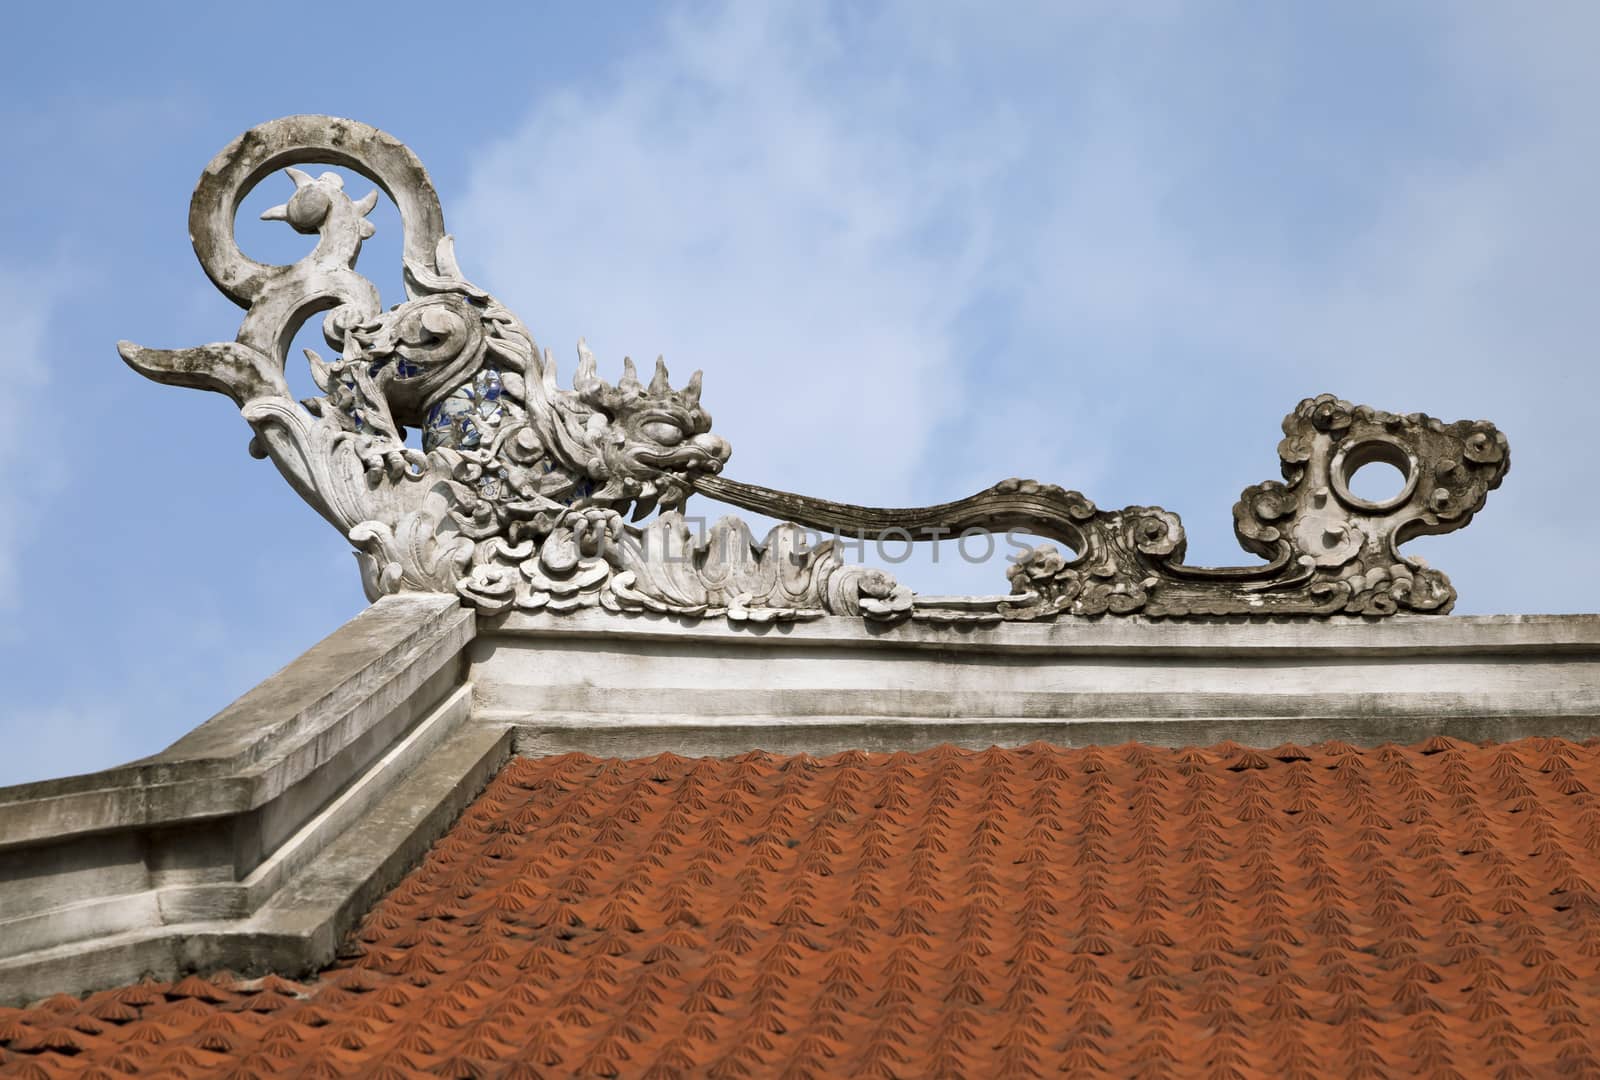 Ceramic decoration on a temple roof in Vietnam